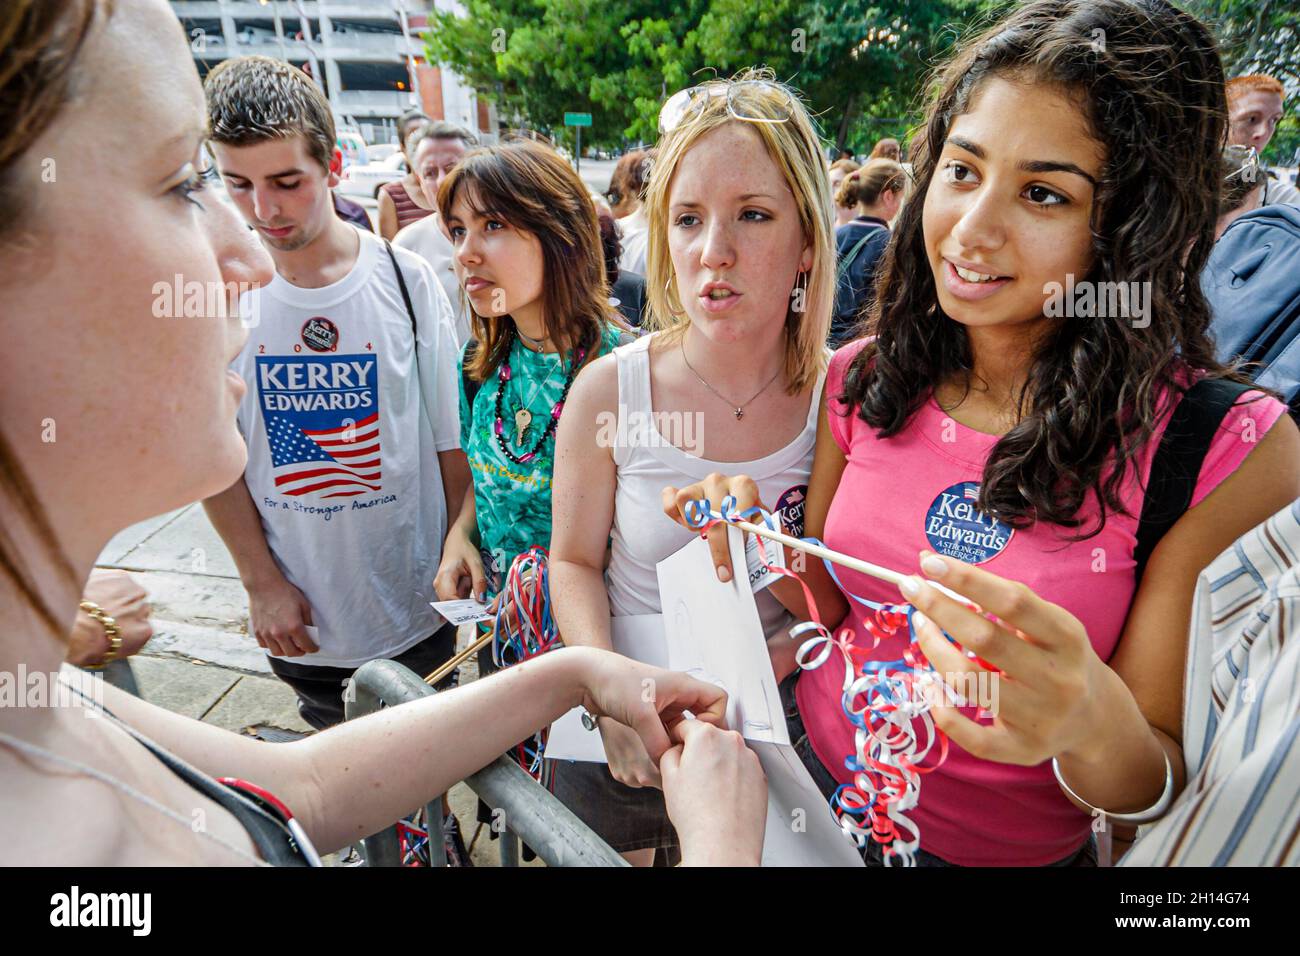 Miami Florida,Stephen Clark Government Center,centre,Democratic Party presidential election rally political students discussing debating issue issues Stock Photo